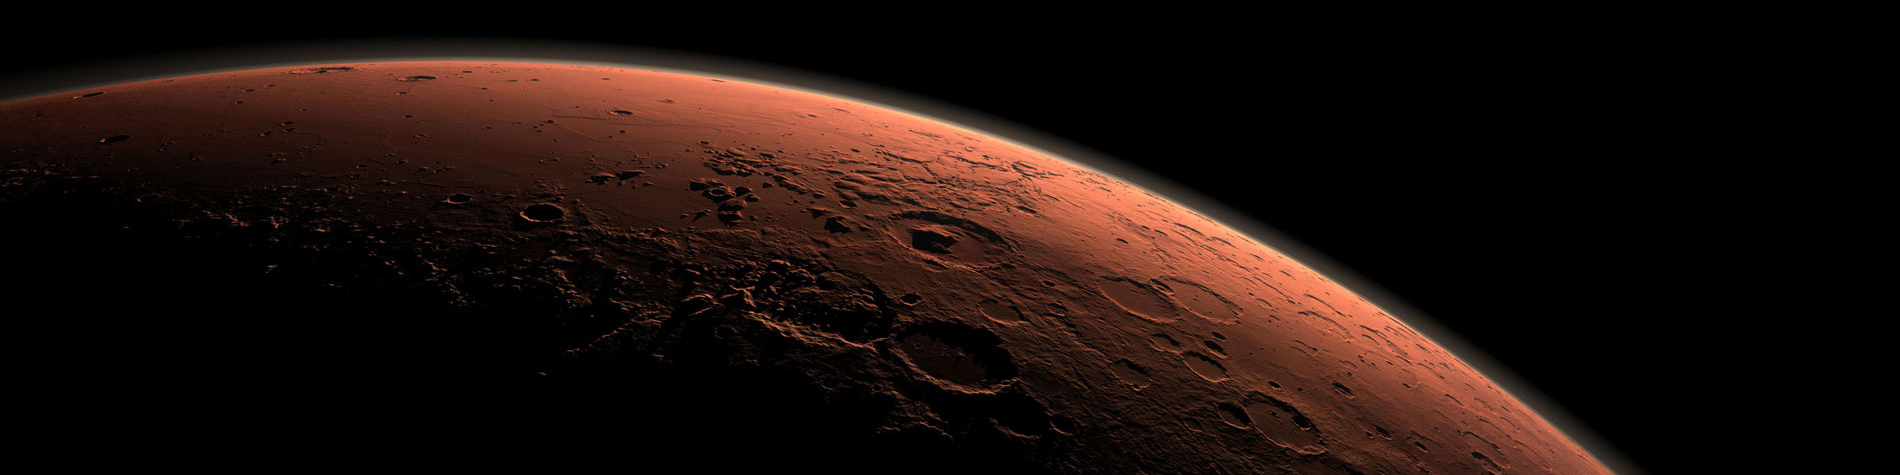 Image gallery representing Mars missions